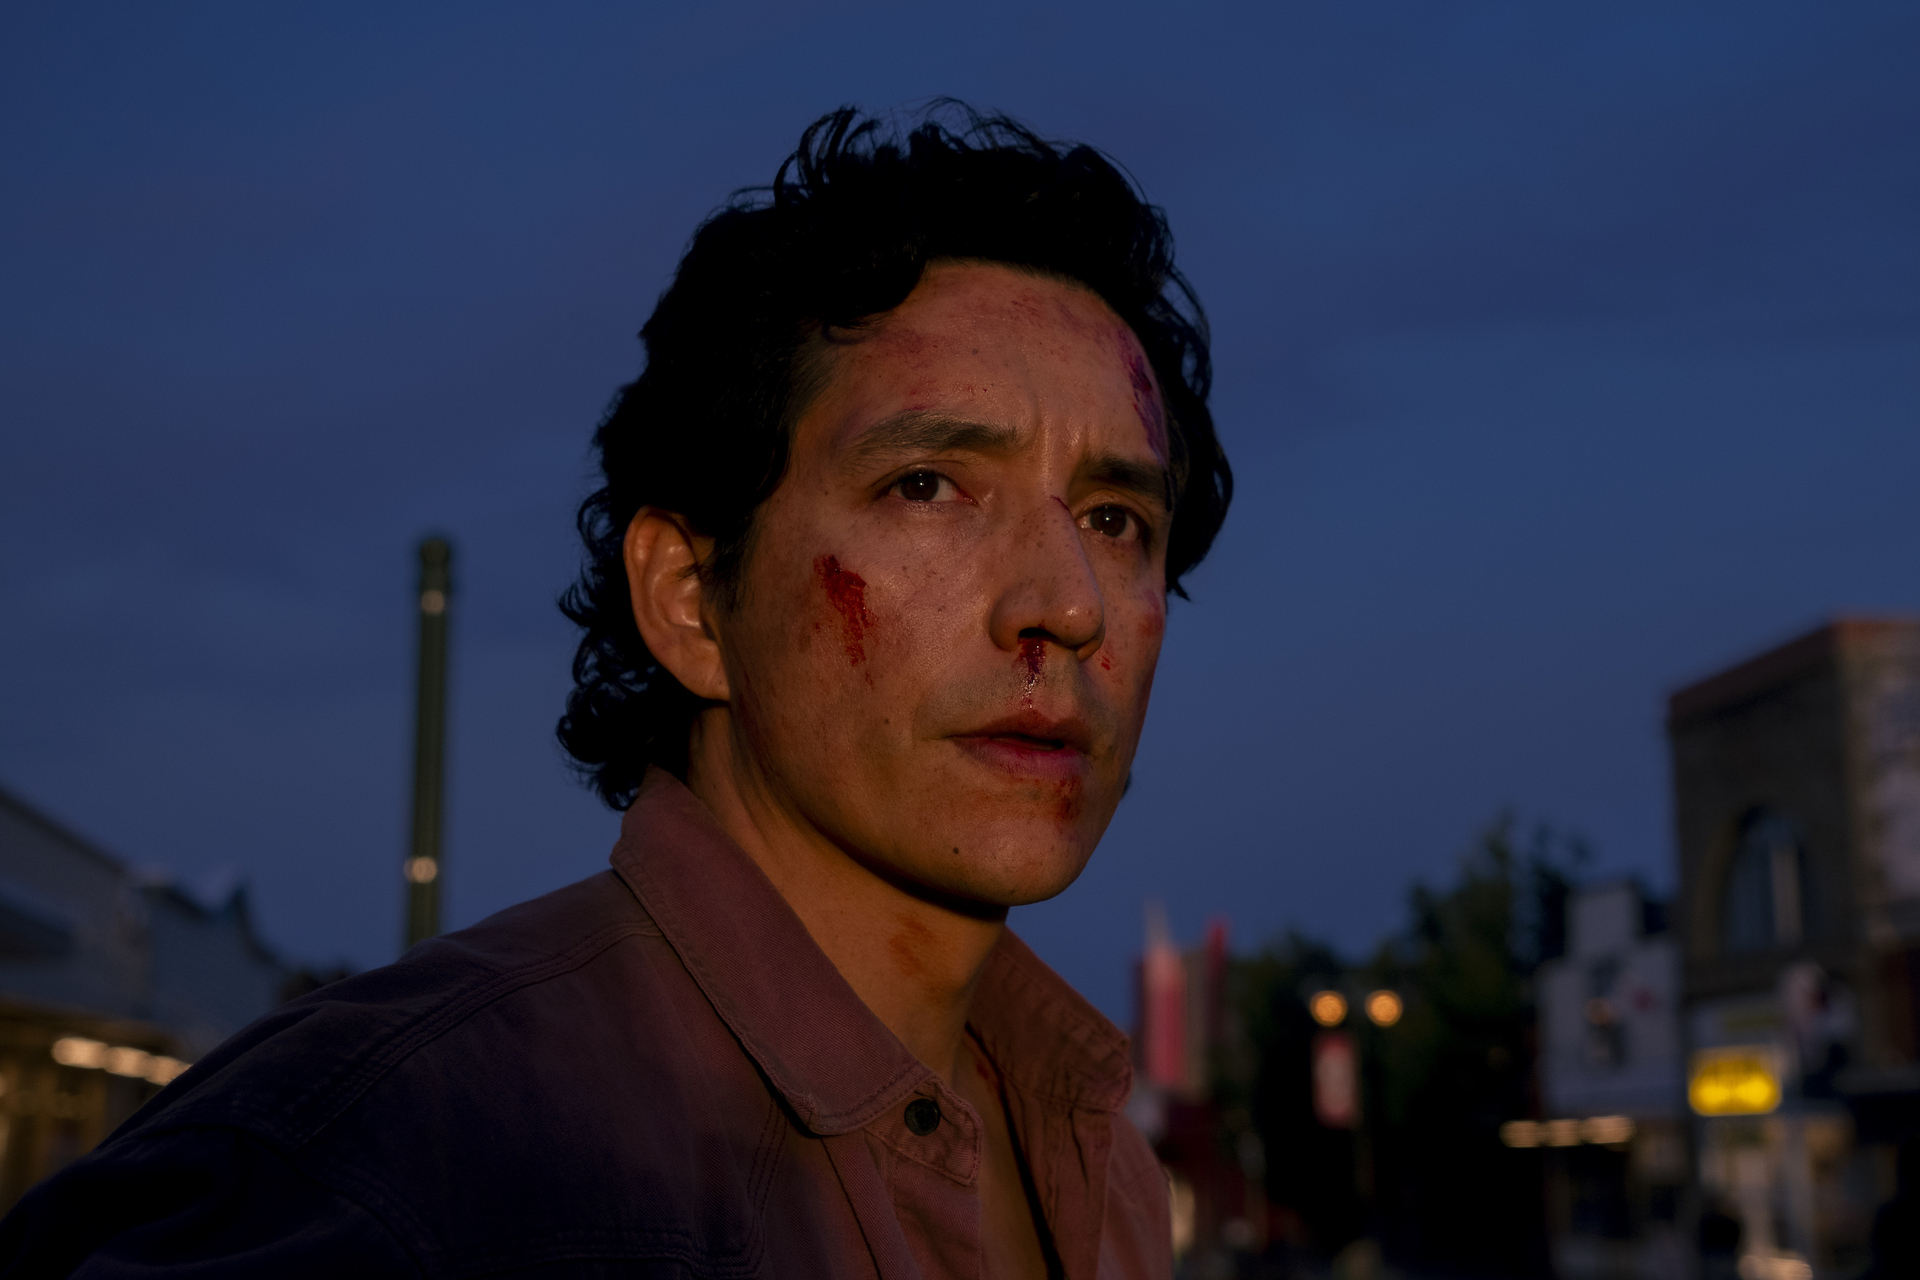 In a dark, dusky shot, Gabriel Luna stands in an urban environment with a serious expression on his bloodstained face.